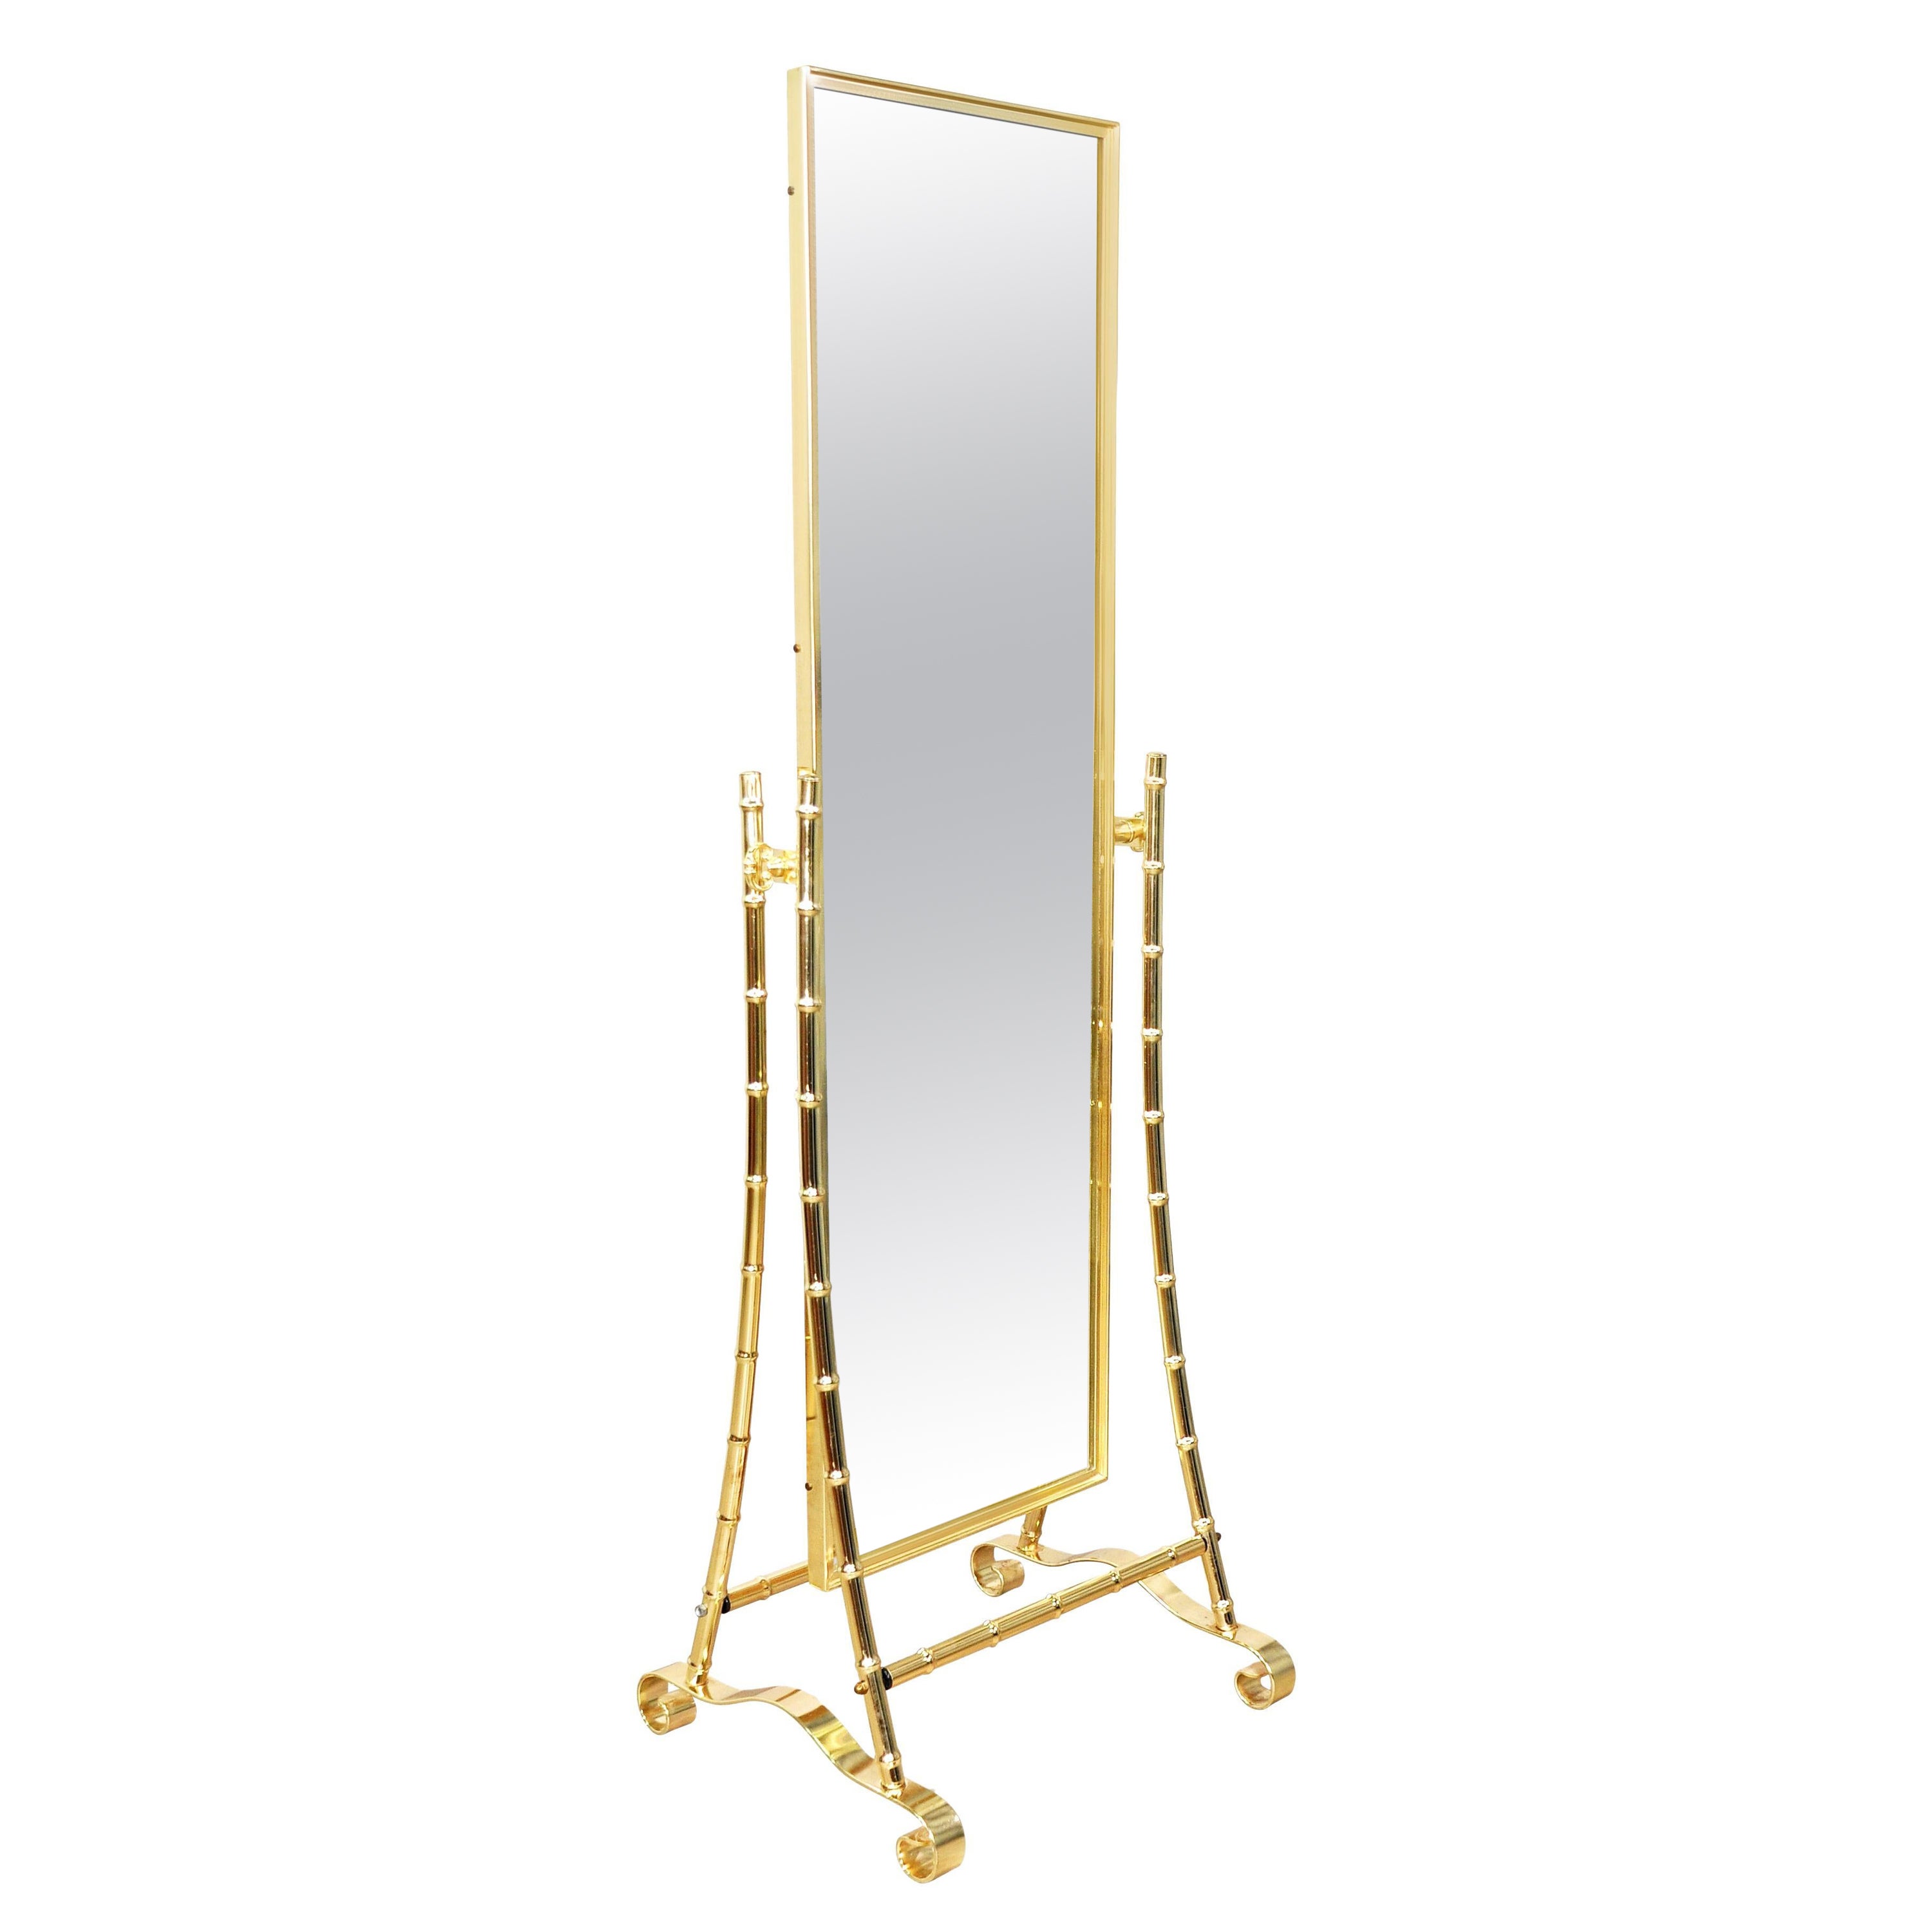 Vintage Hollywood Regency Brass Faux Bamboo Cheval Floor Mirror